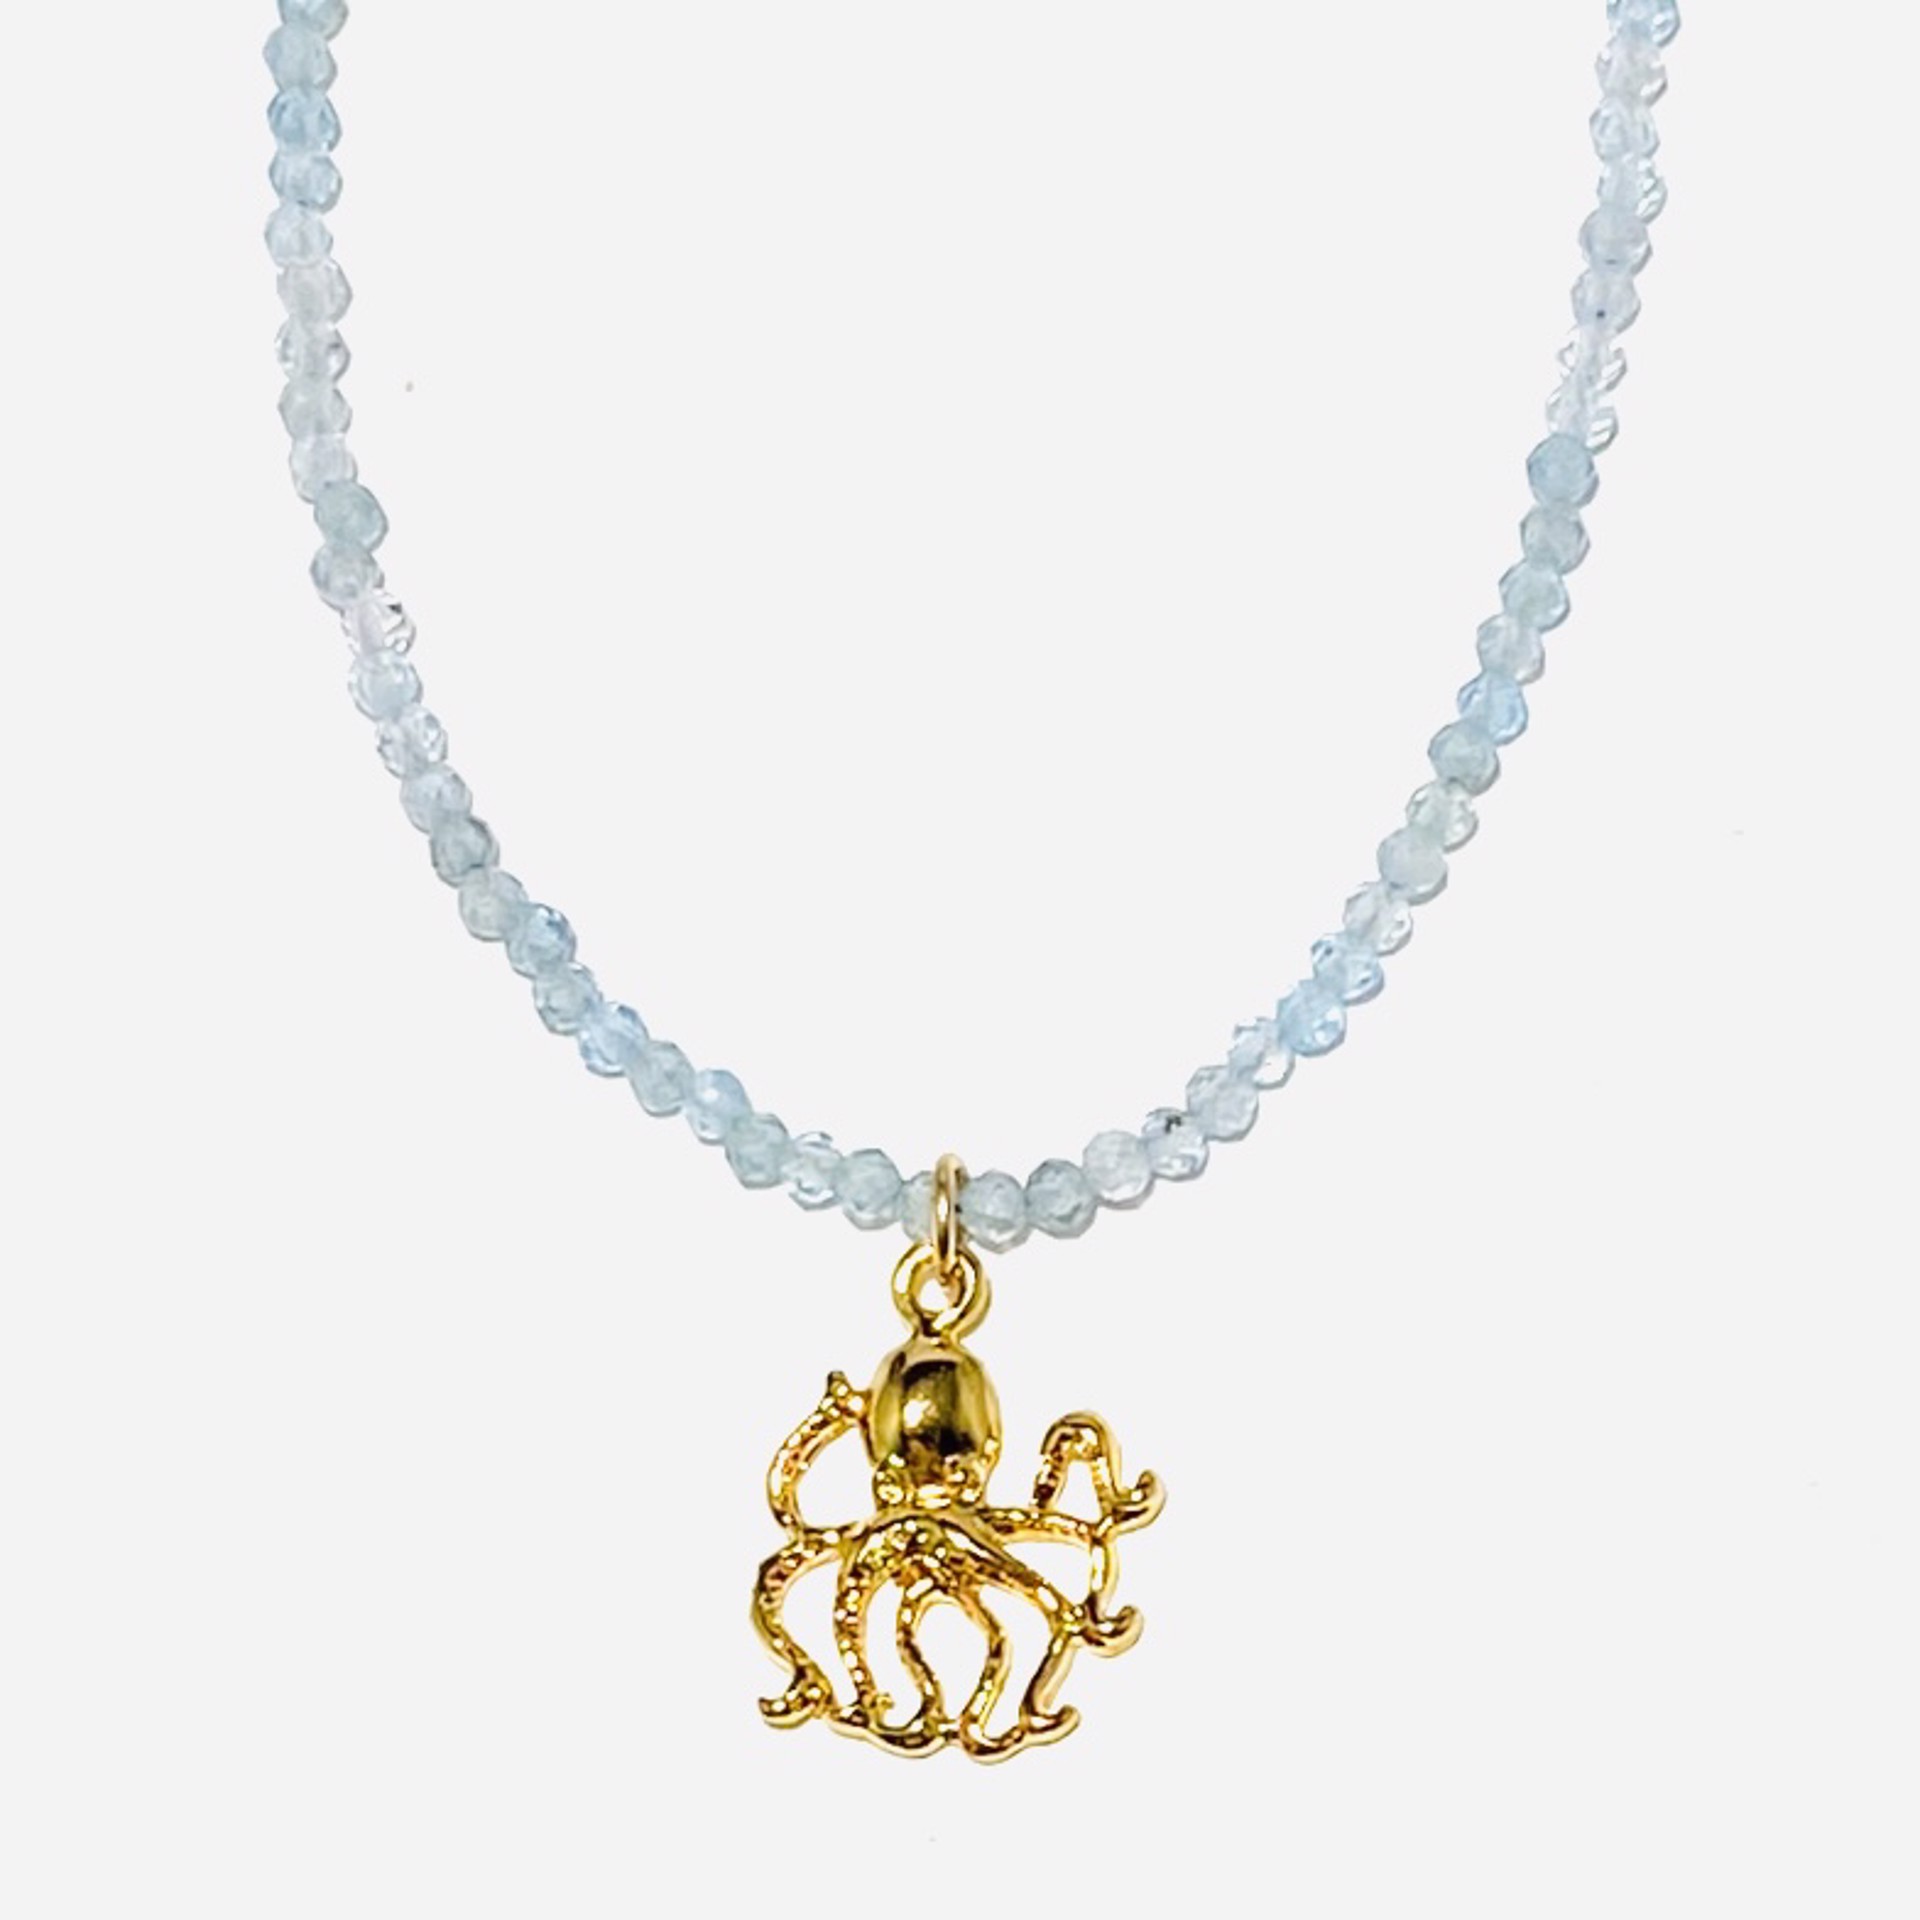 Tiny Faceted Aquamarine Vermeil Octopus Pendant Necklace by Nance Trueworthy